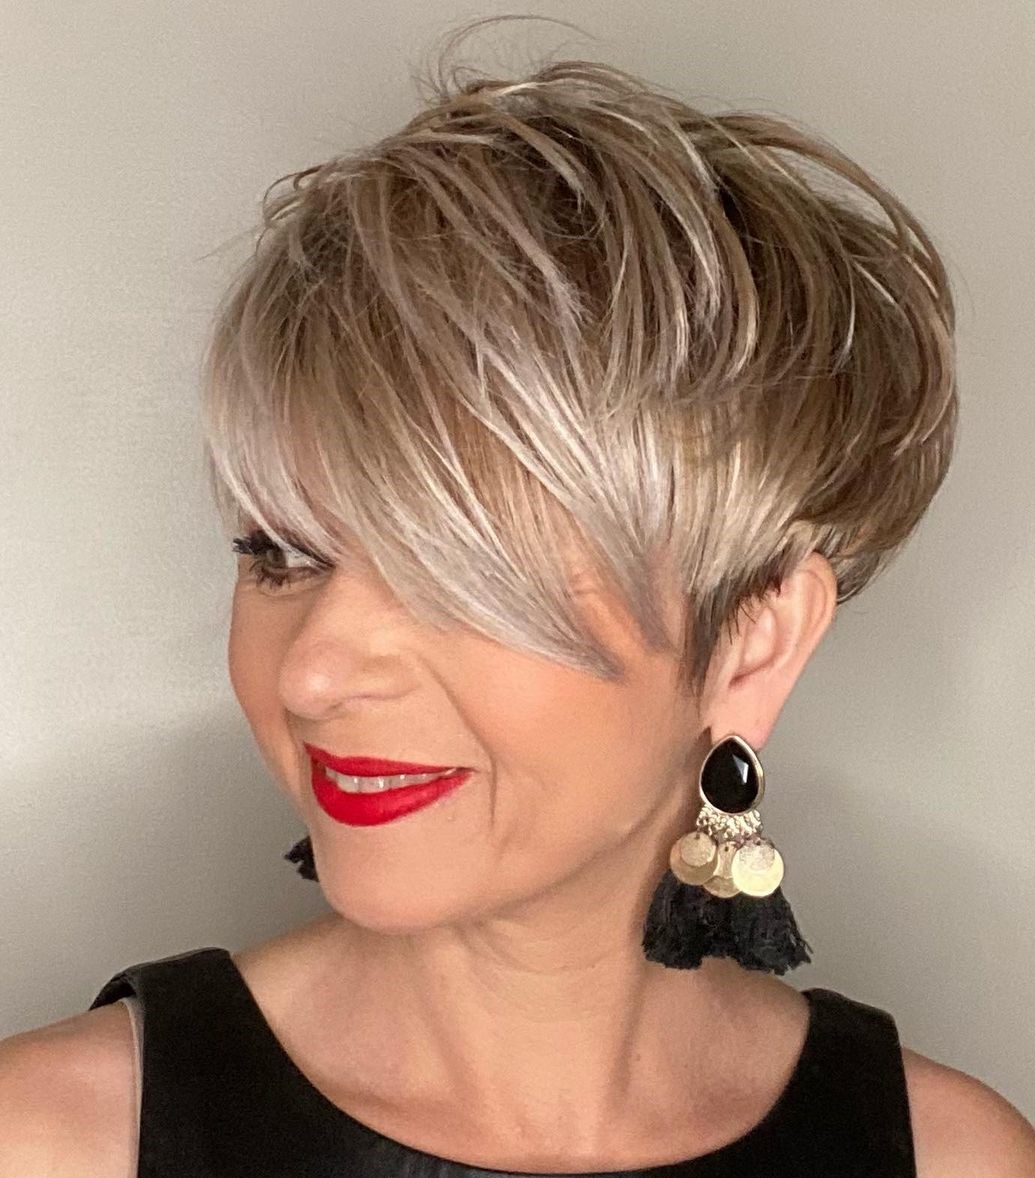 20 Age-Defying Hairstyles with Bangs for Older Women